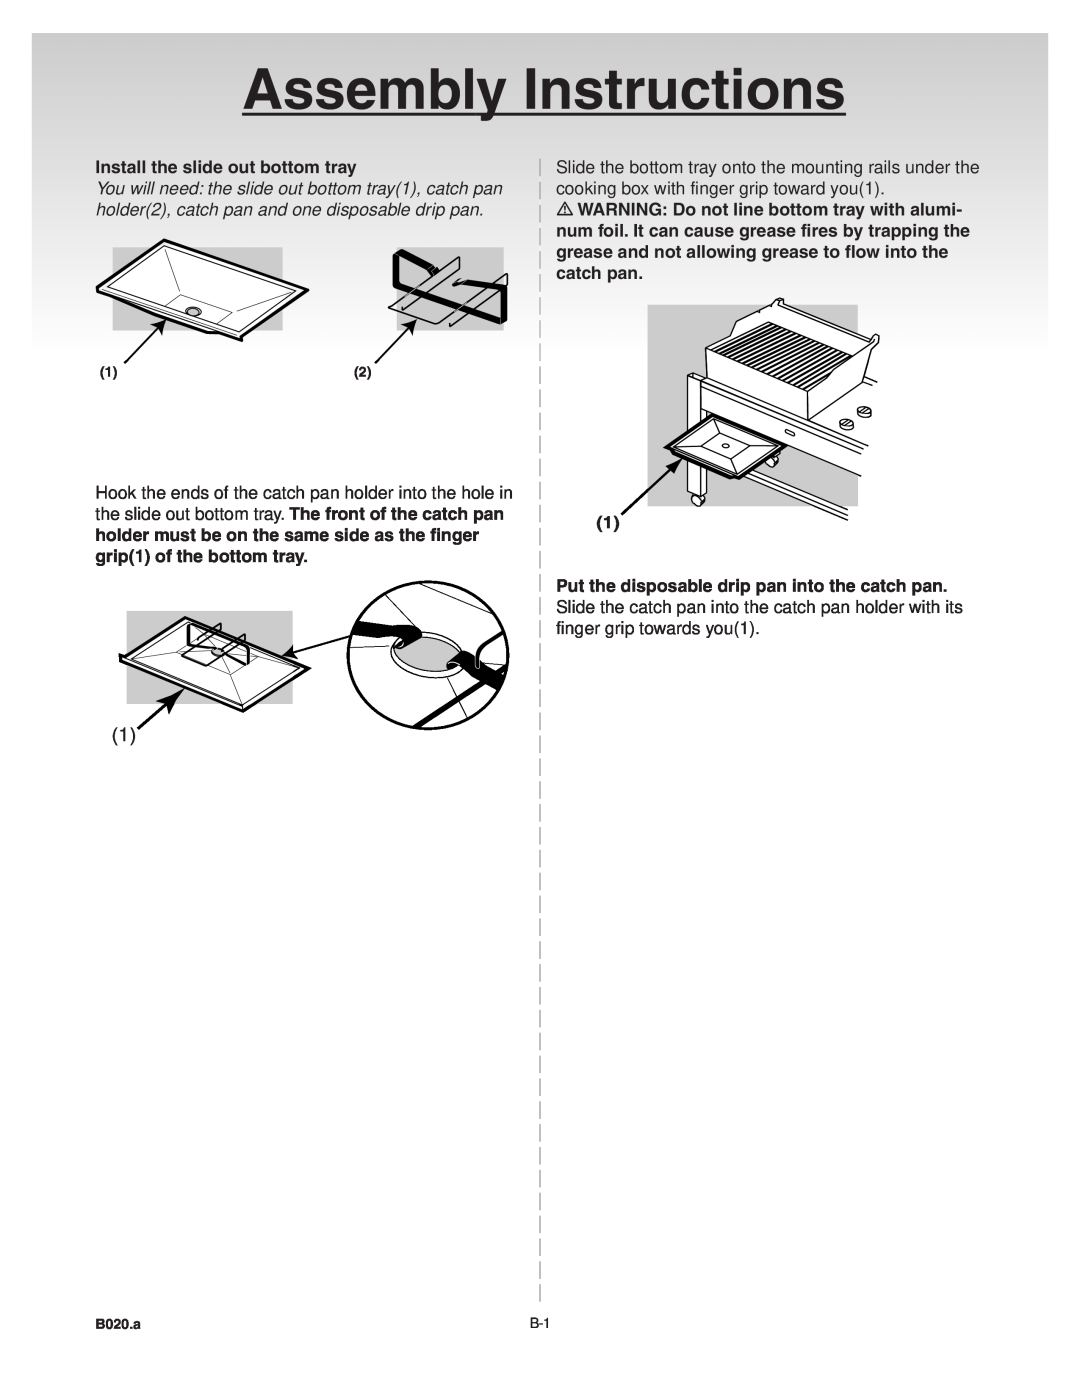 Weber Platinum C manual Assembly Instructions, You will need the slide out bottom tray1, catch pan 